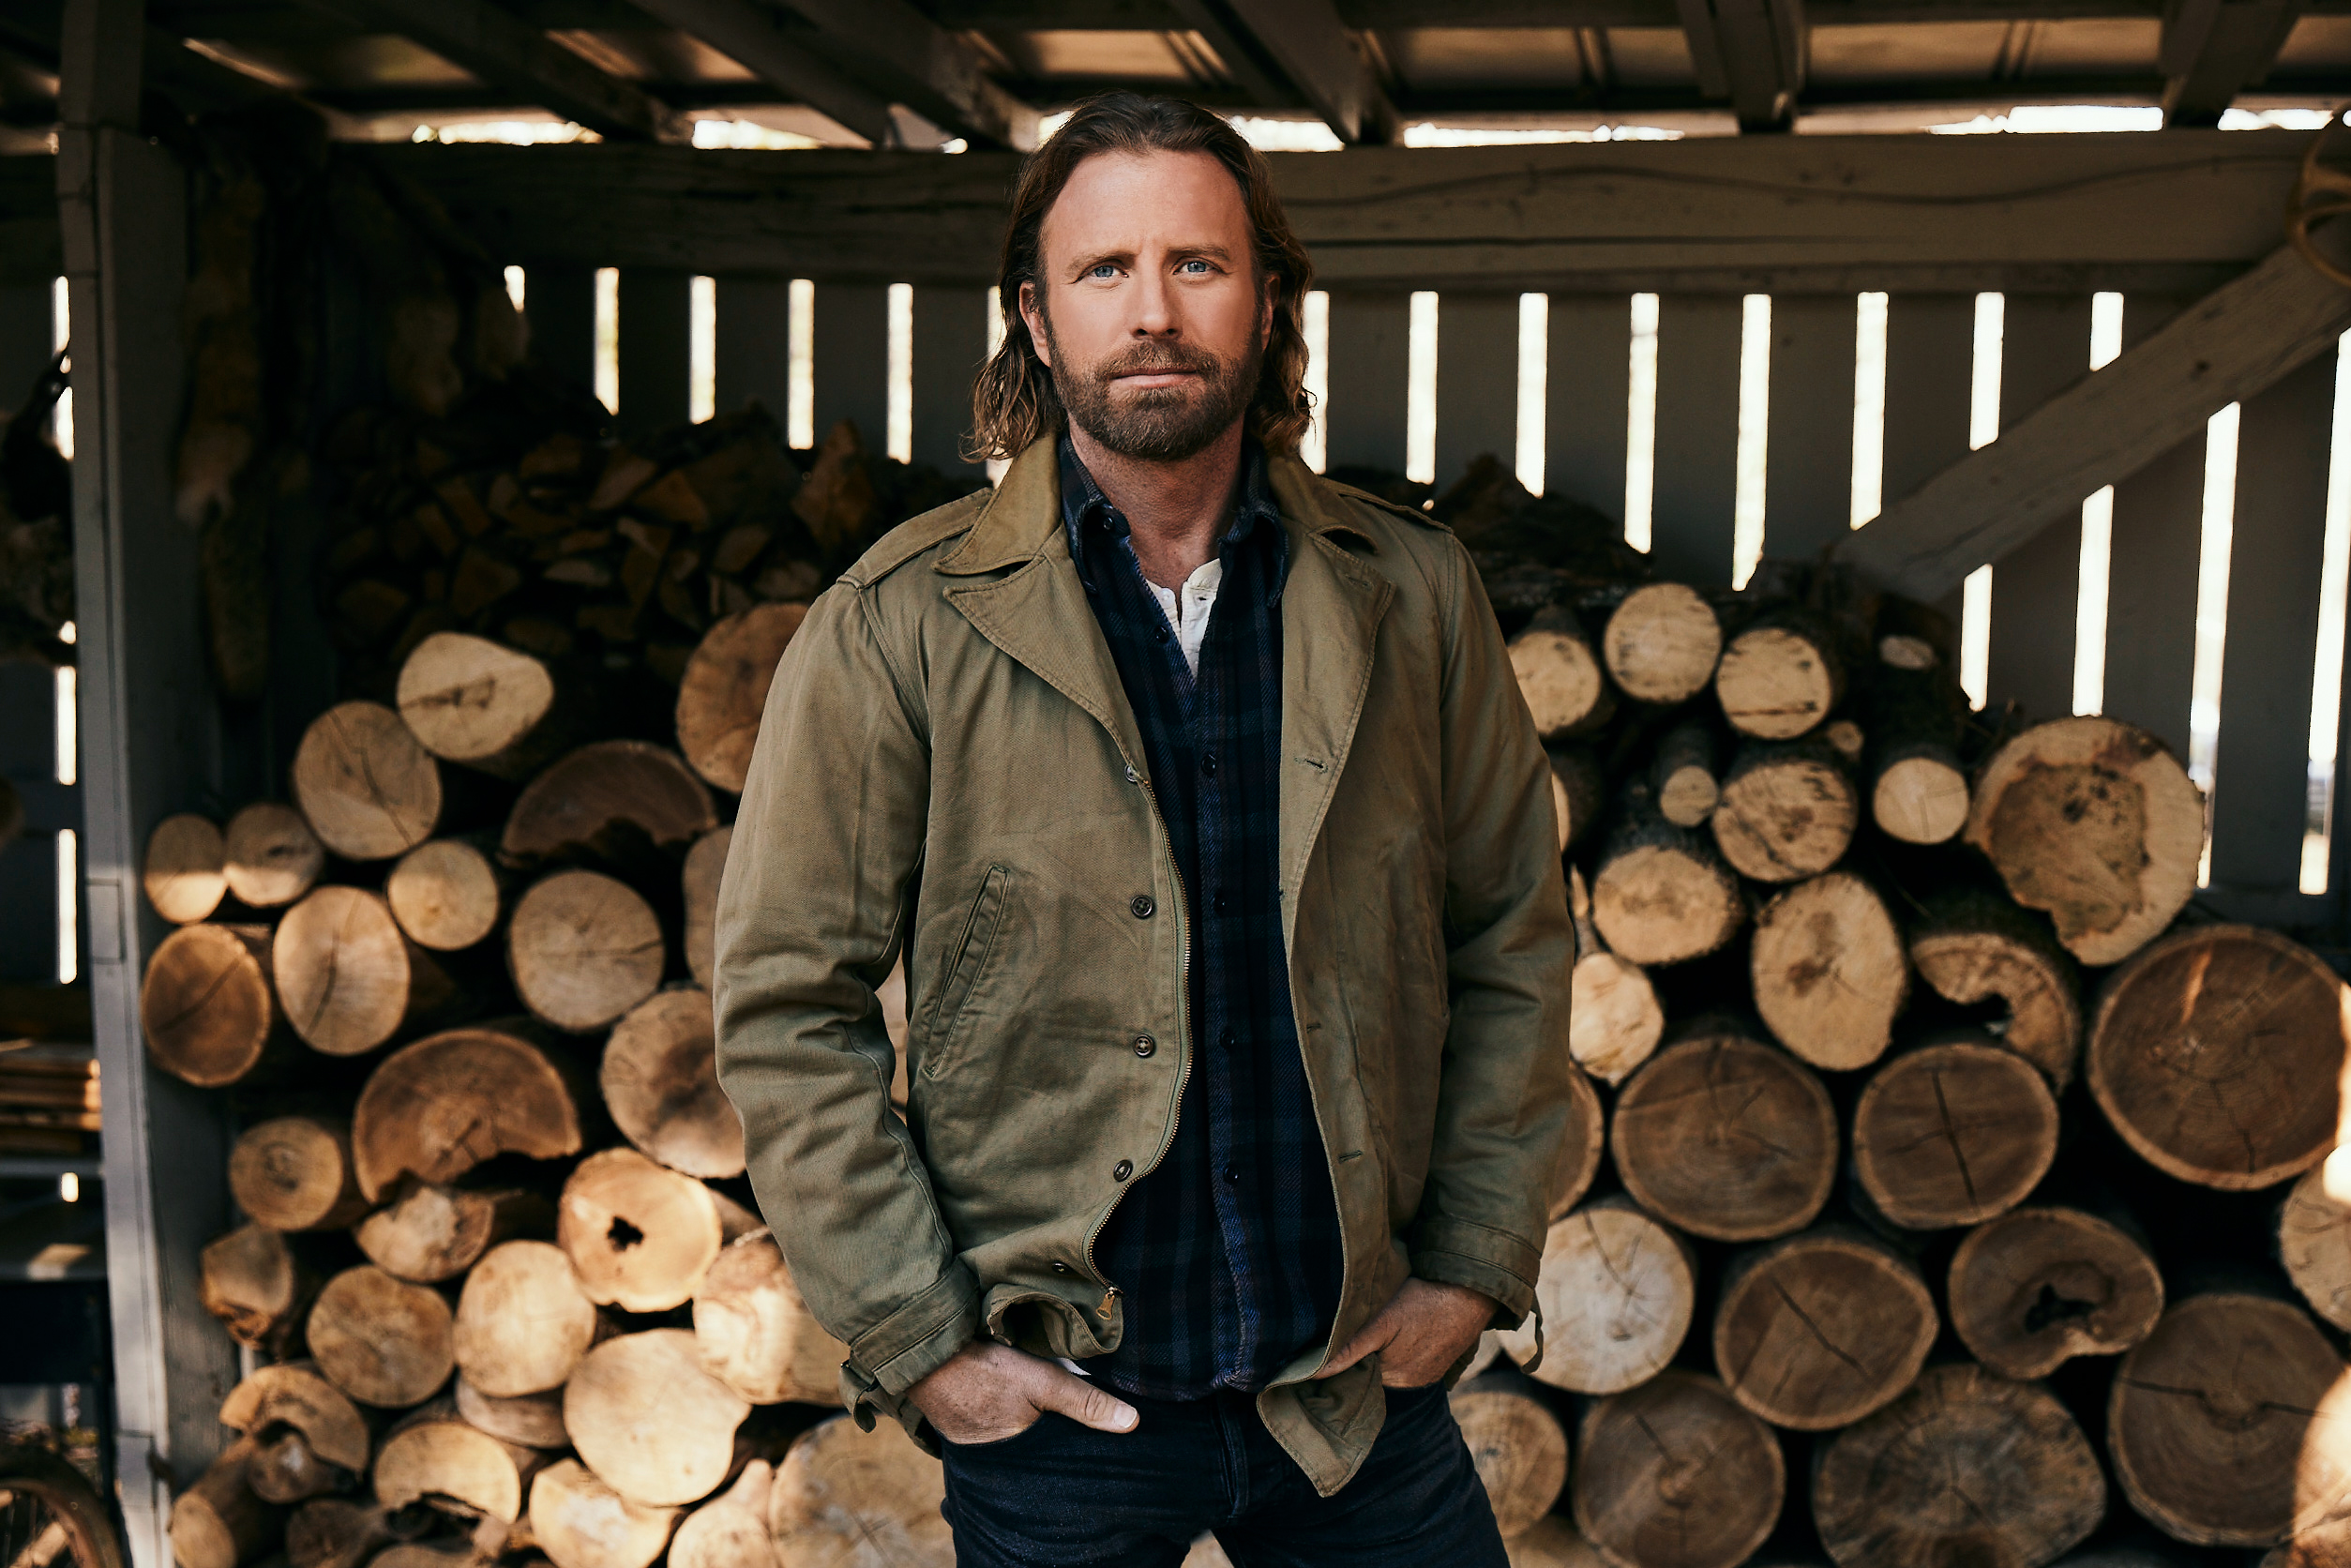 “CAPTIVATING PERFORMER” DIERKS BENTLEY HITS THE ROAD ON GRAVEL & GOLD TOUR WITH SOLD OUT FIRST WEEKEND.